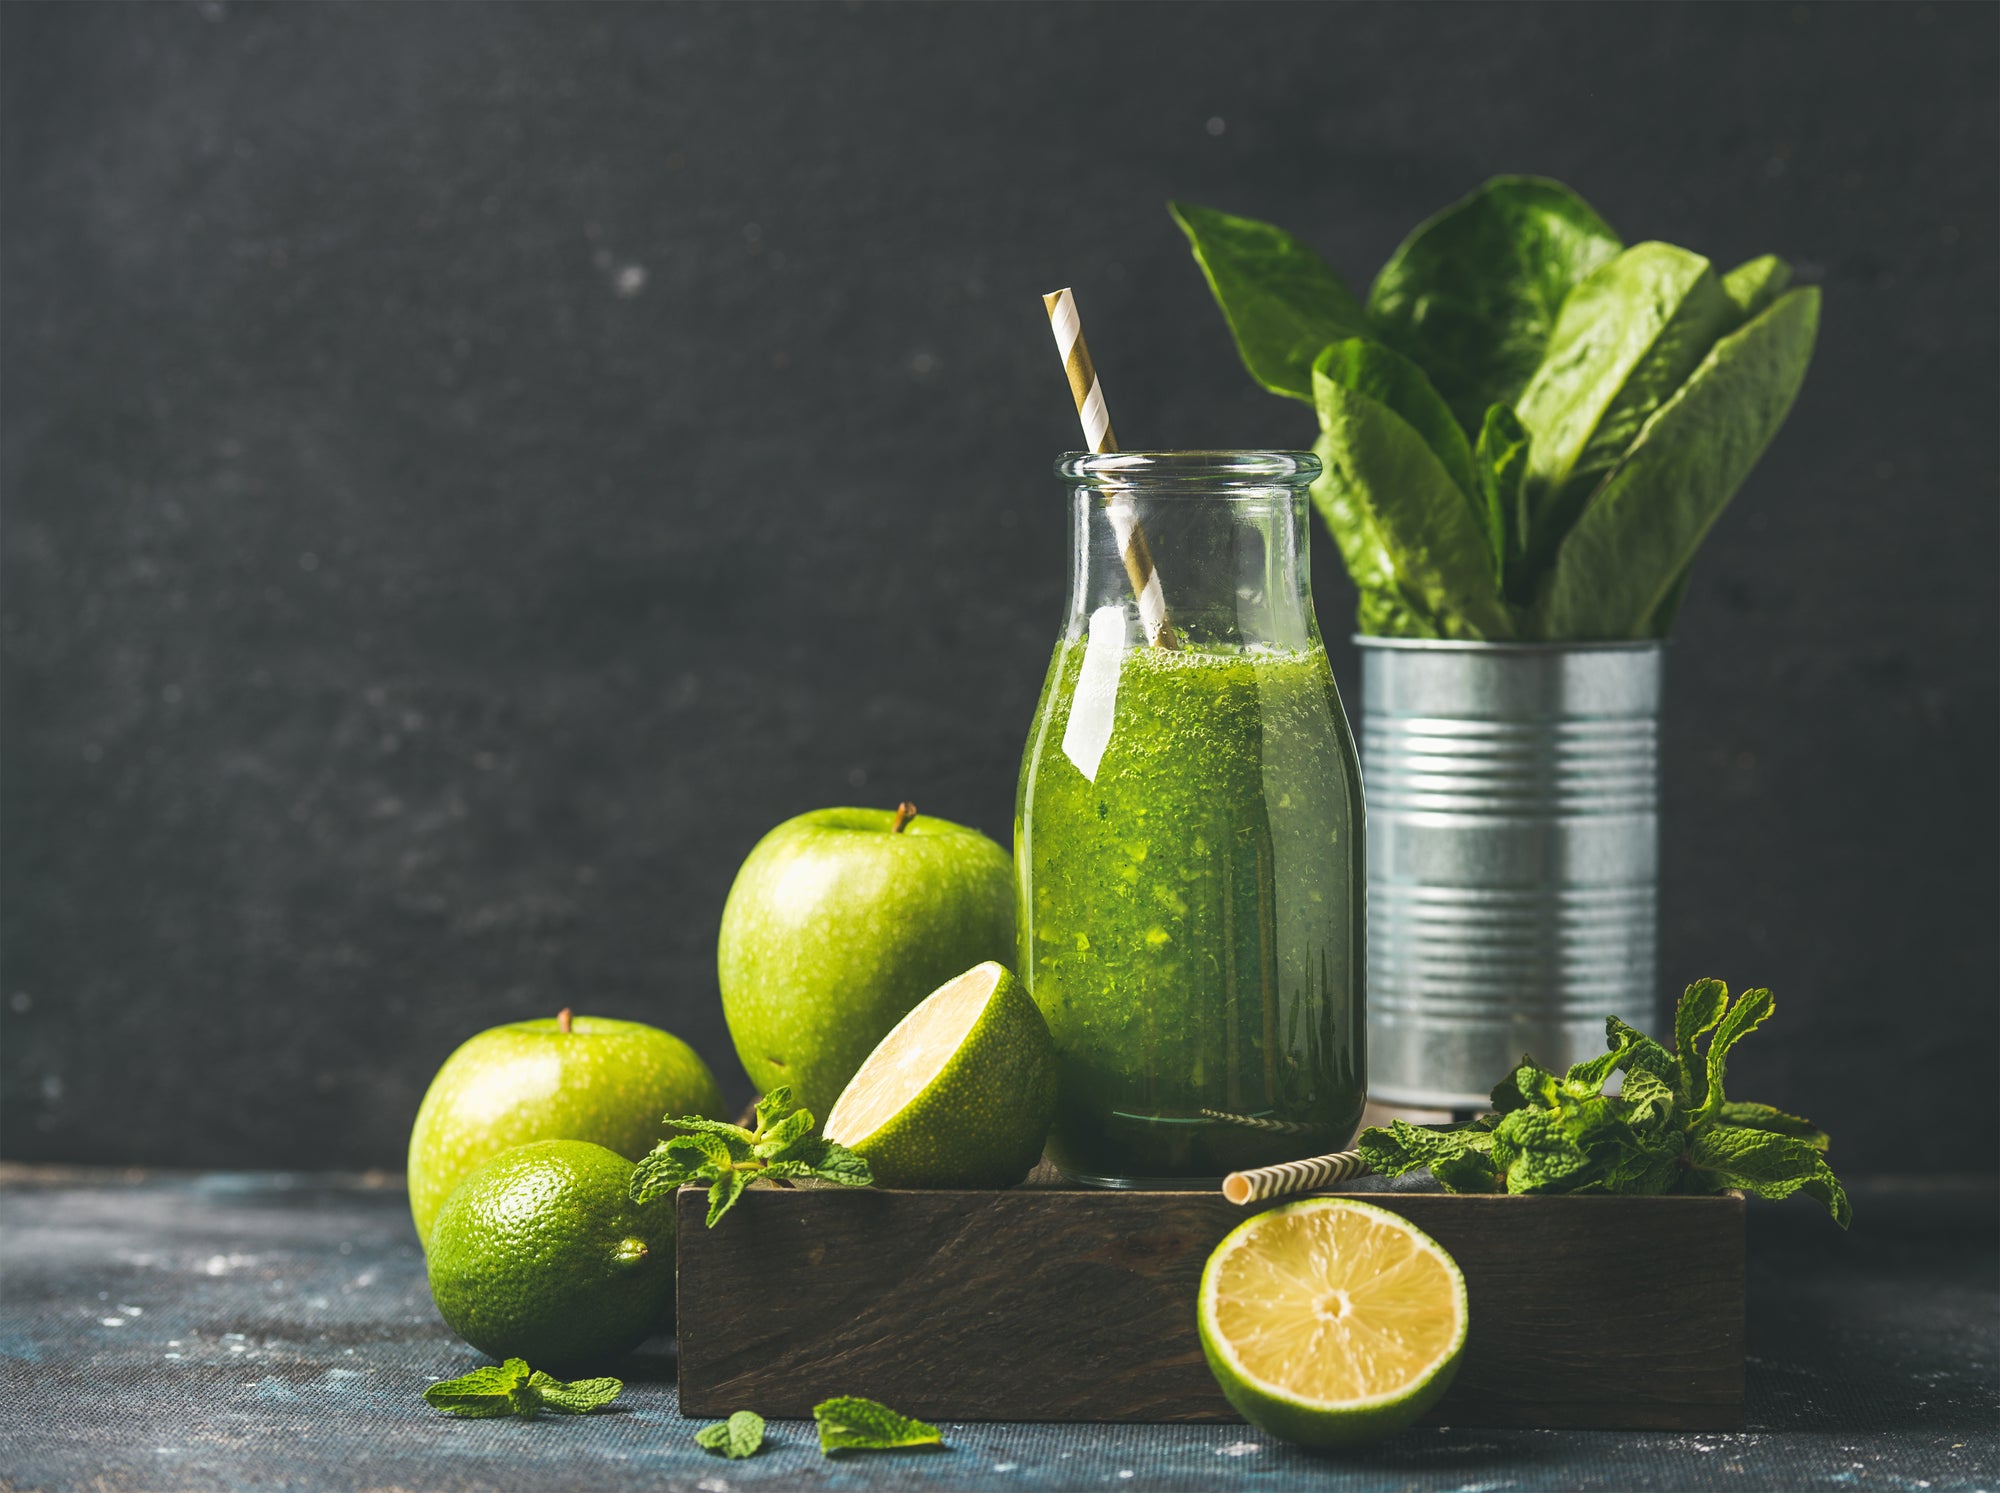 a bottle of citrus pressed greens smoothie - fat burner, a can on the side filled with spinach, one green apple and a half-slice lemon surrounded by mint leaves, a green apple, a lime, and a slice of lime on top of a black-painted wooden table